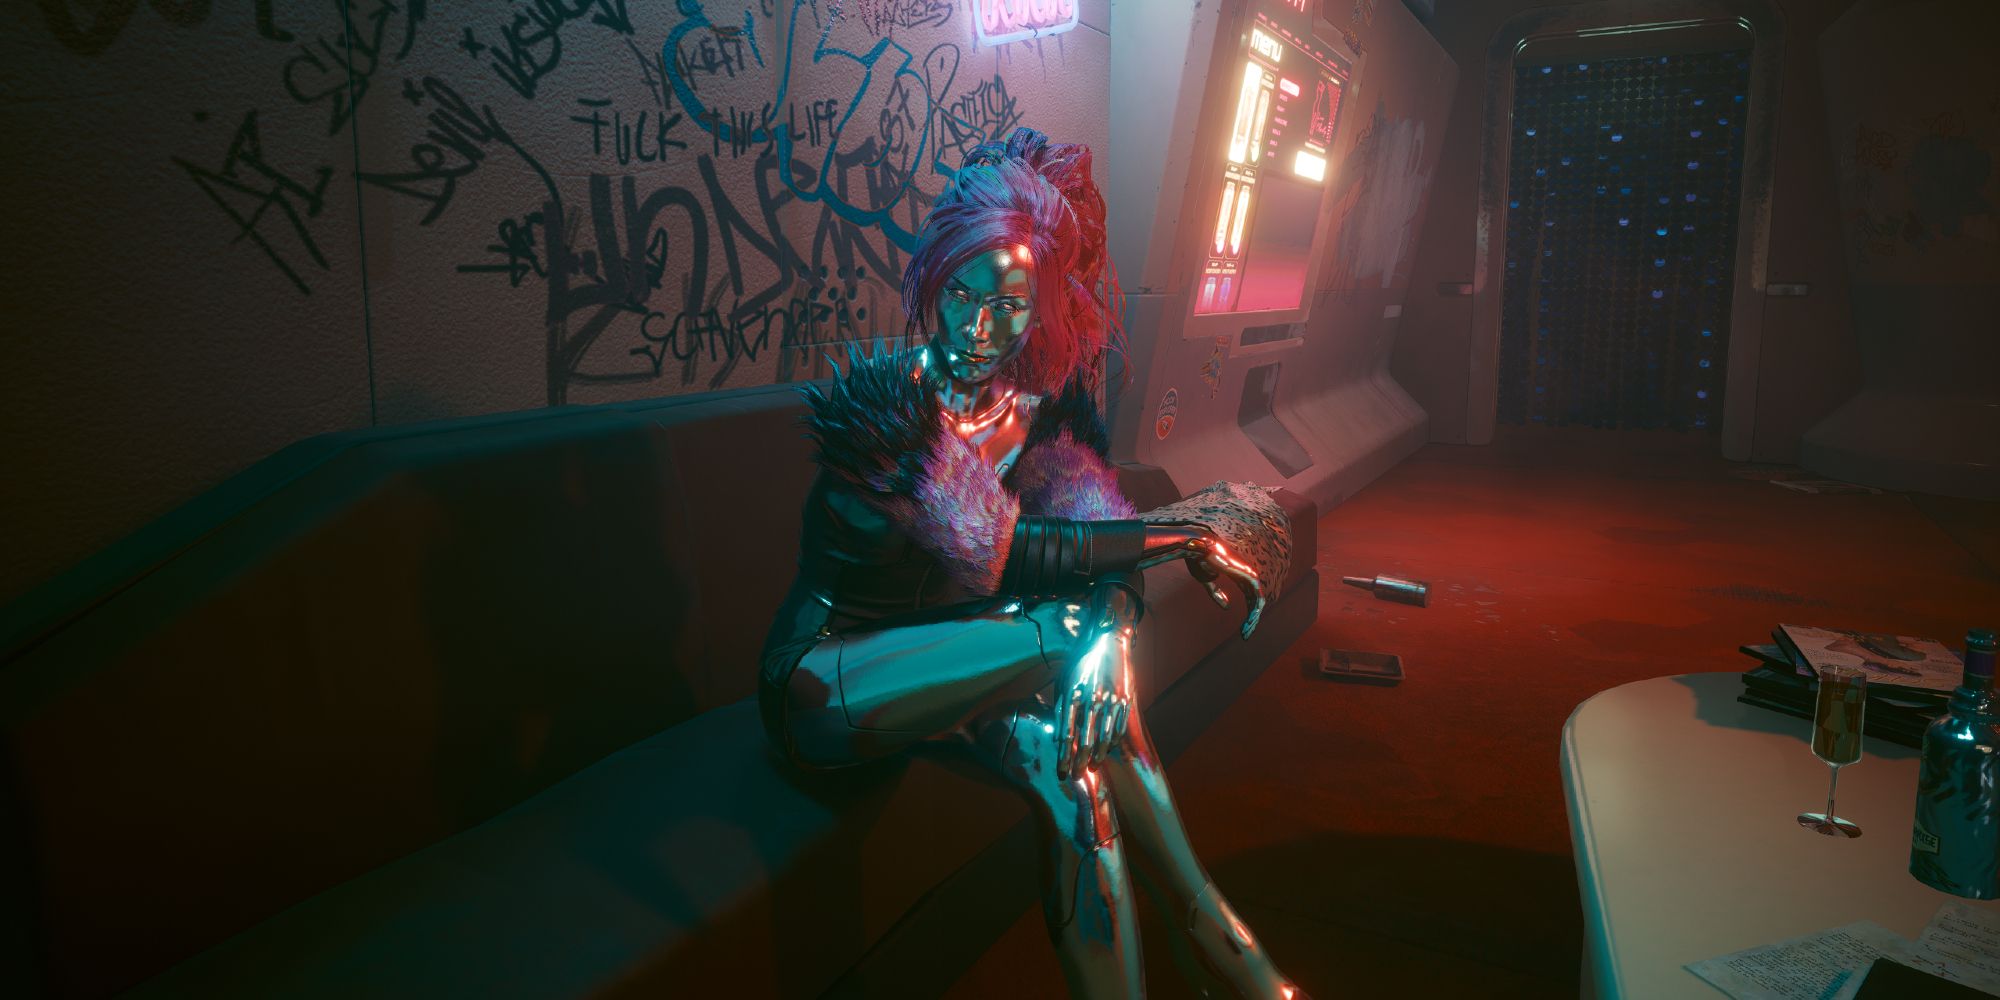 Lizzy Wizzy looking at V inside an hotel room in Cyberpunk 2077.